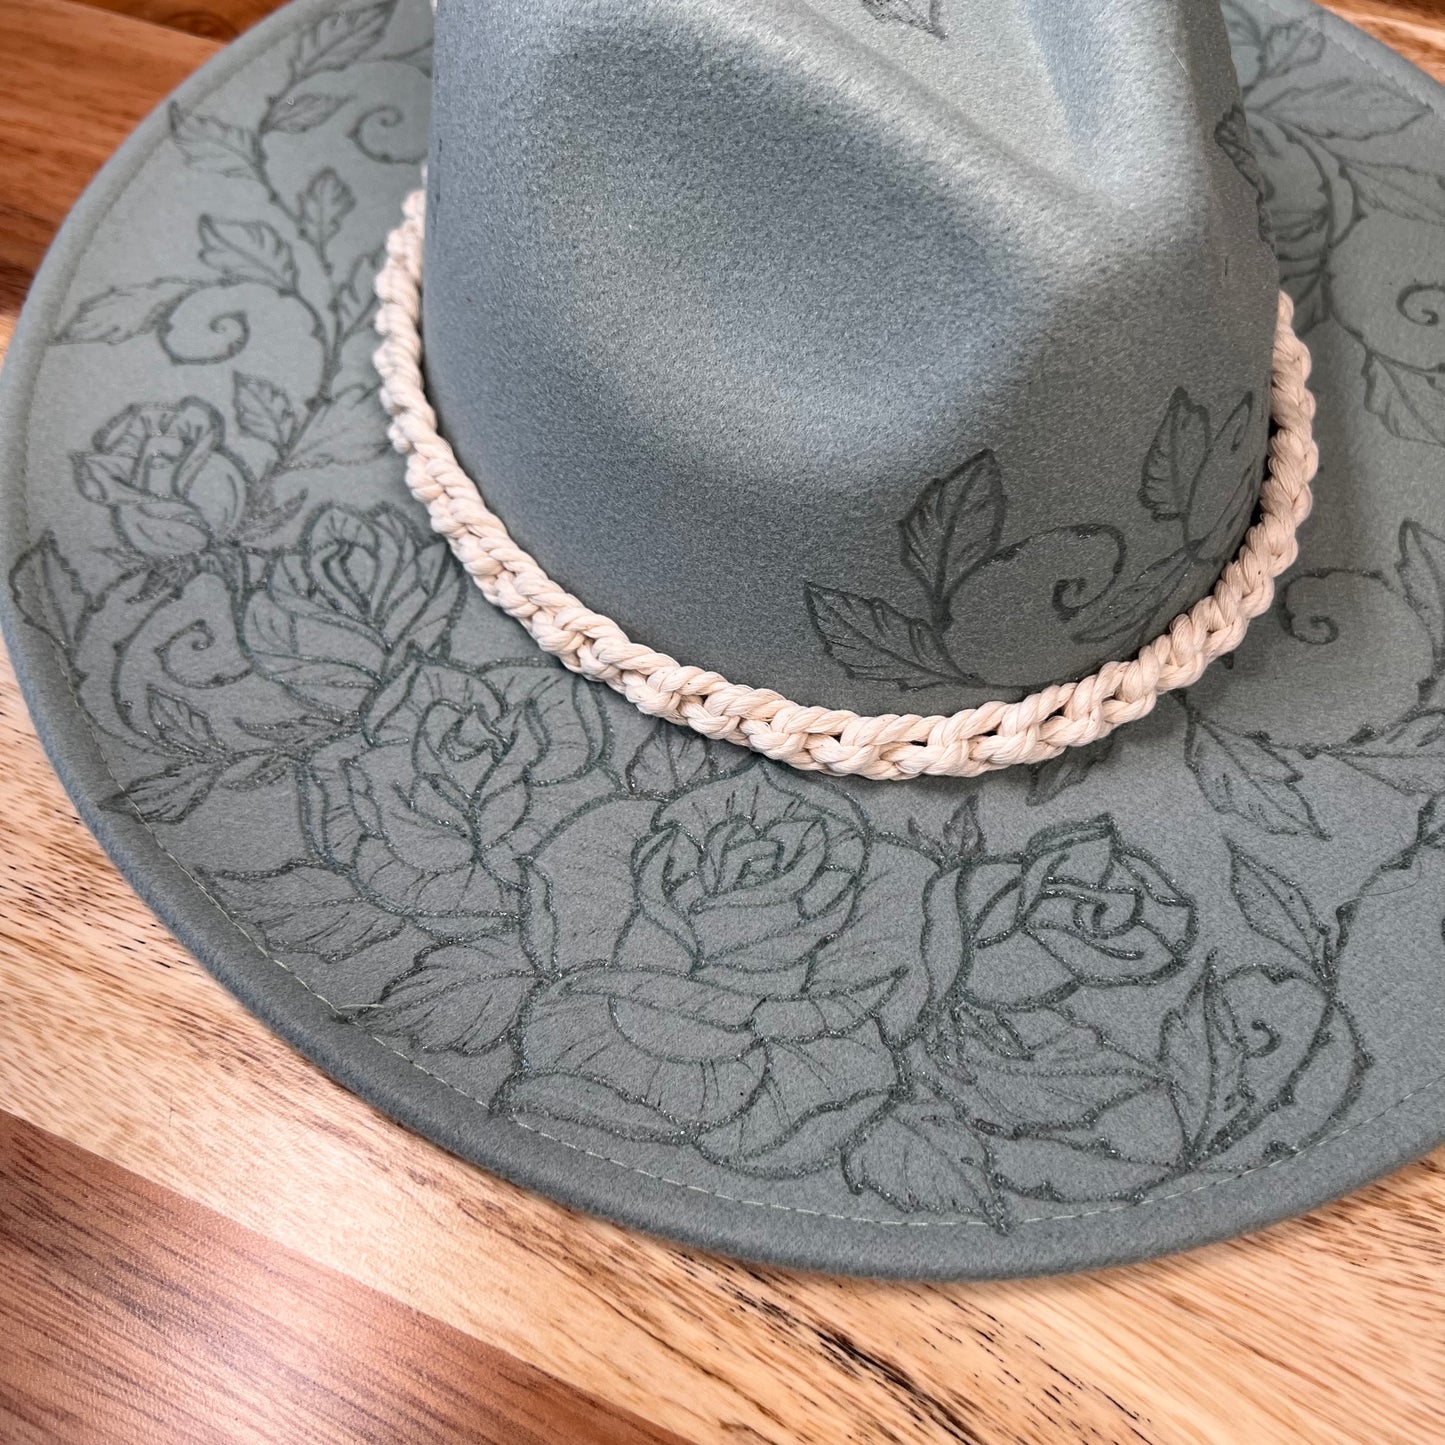 Roses and Thorns Mint Green wide brim Fedora